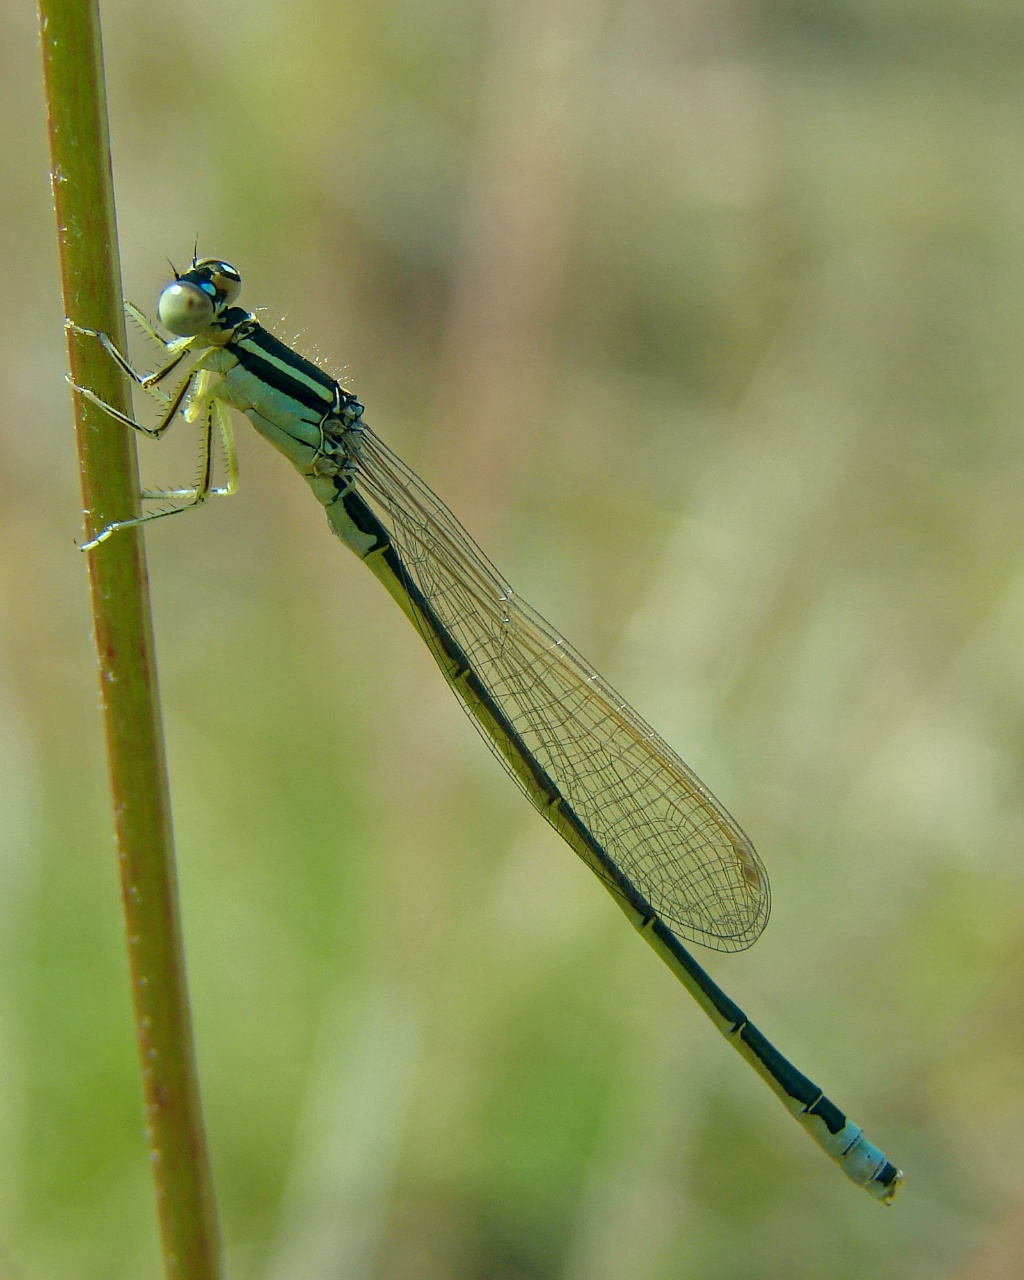 Agrion nain - Ischnura pumilio - <a href='https://commons.wikimedia.org/wiki/File:Ischnura_pumilio_M.jpg'>I, Chrumps</a>, <a href='http://creativecommons.org/licenses/by-sa/3.0/'>CC BY-SA 3.0</a>, via Wikimedia Commons - BioObs